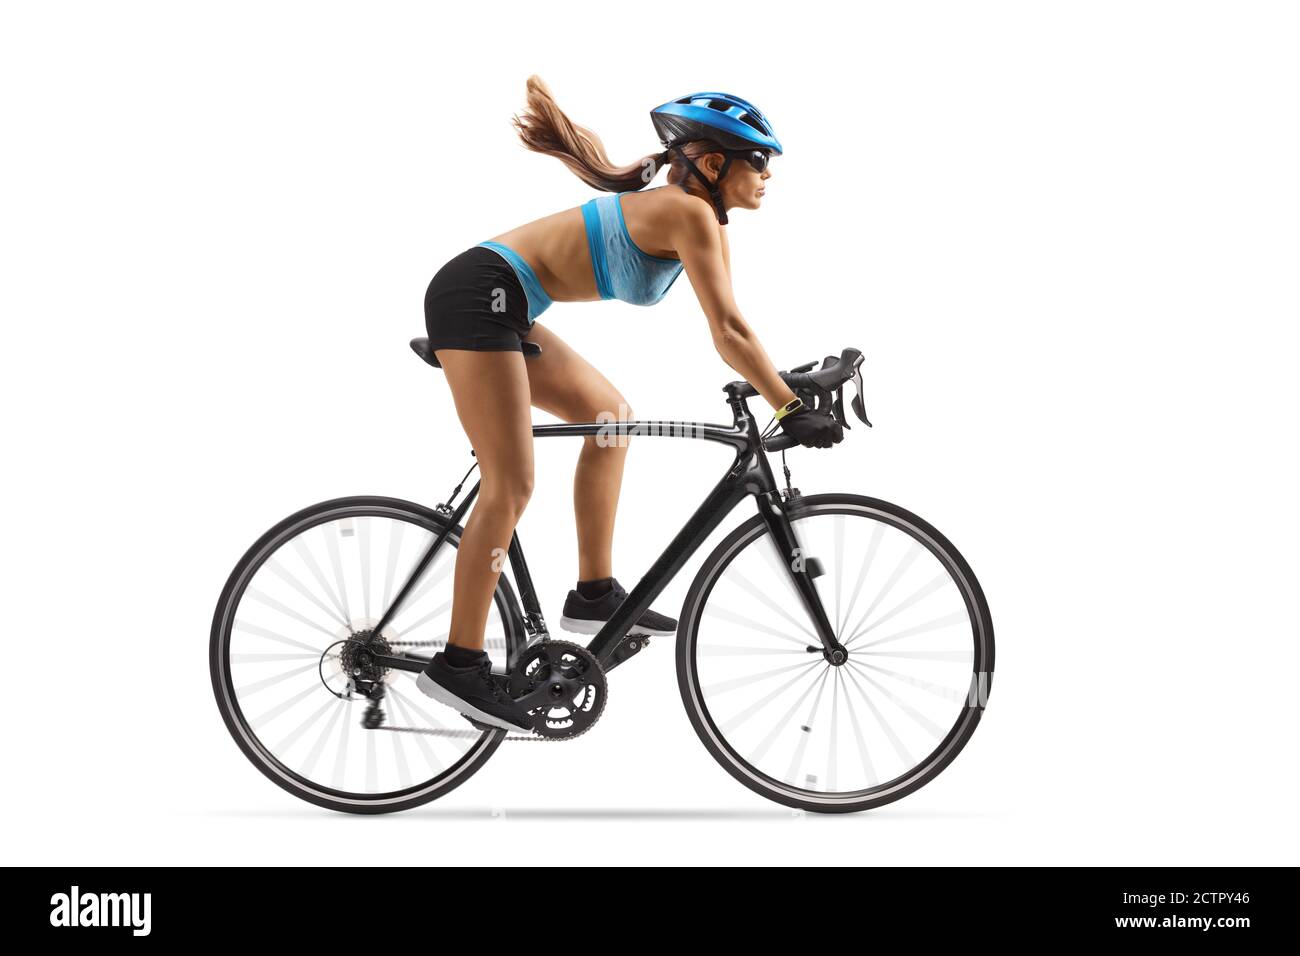 Full length profile shot of a female cyclist riding a bicycle with a helmet isolated on white background Stock Photo